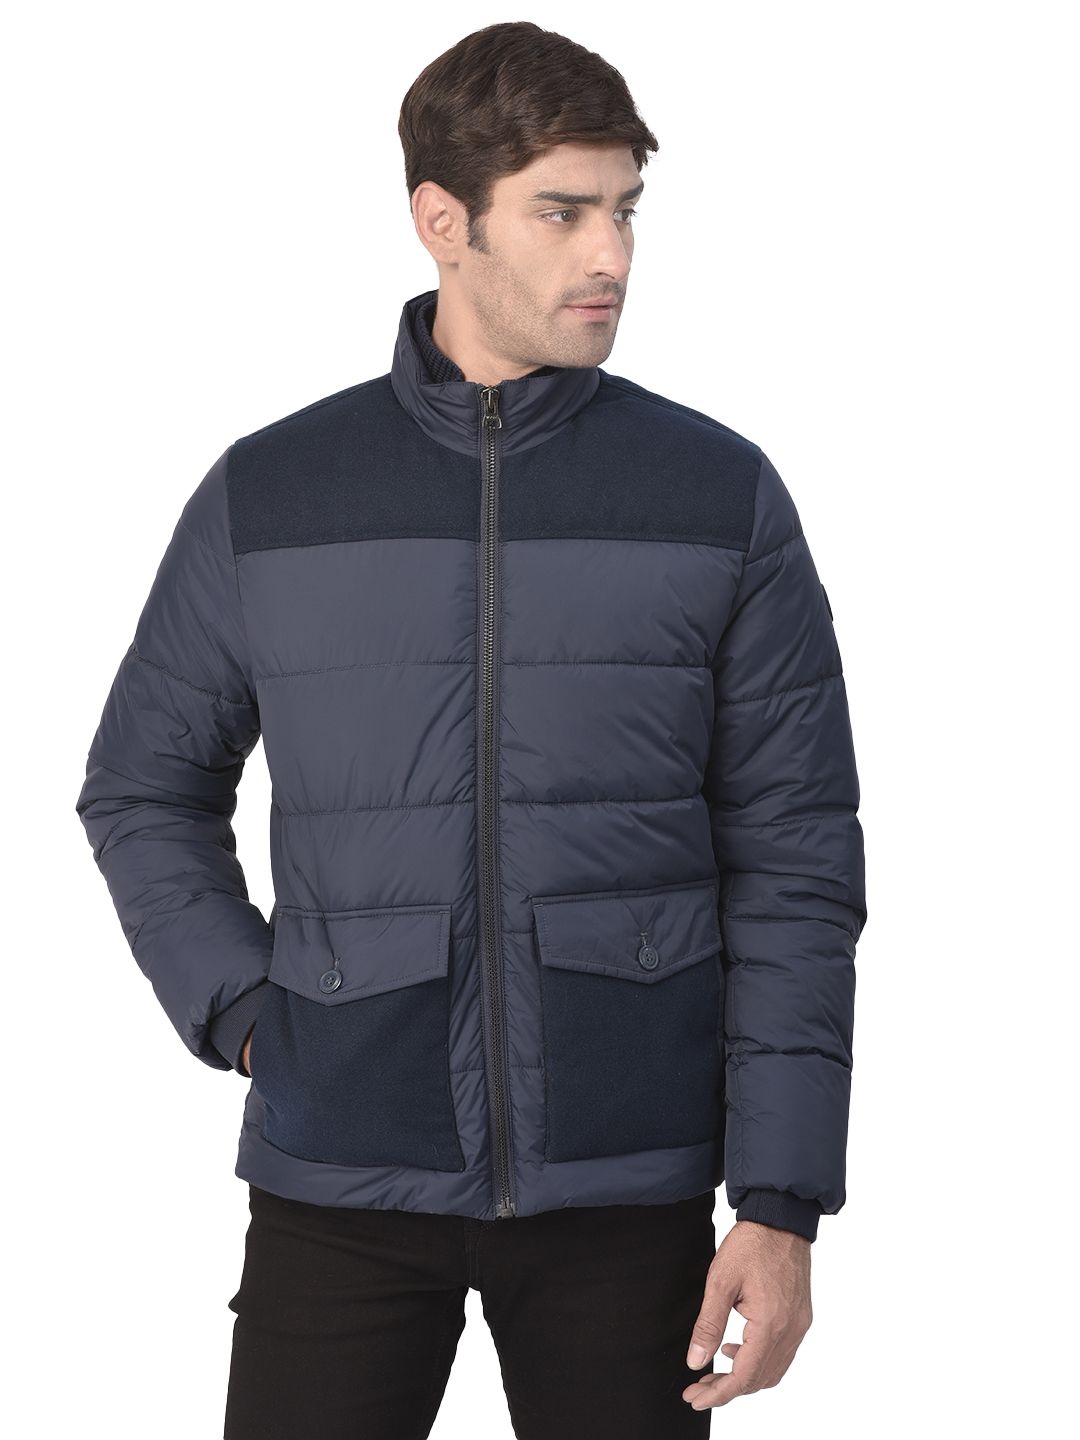 blue quilted jacket for men 4 797 mrp 7 995 40 % off prices include ...